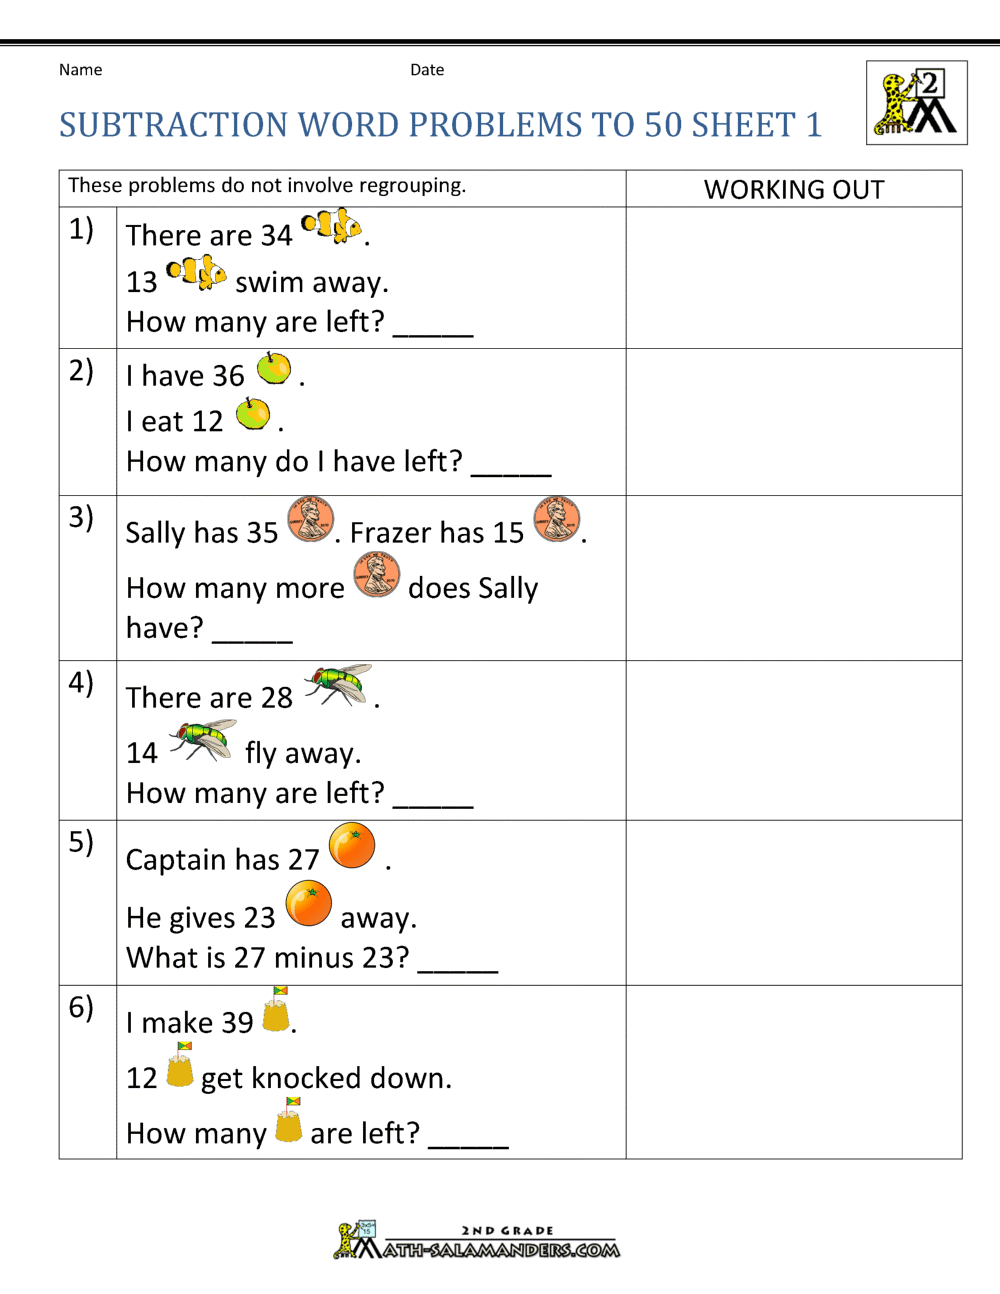 subtraction-word-problems-2nd-grade